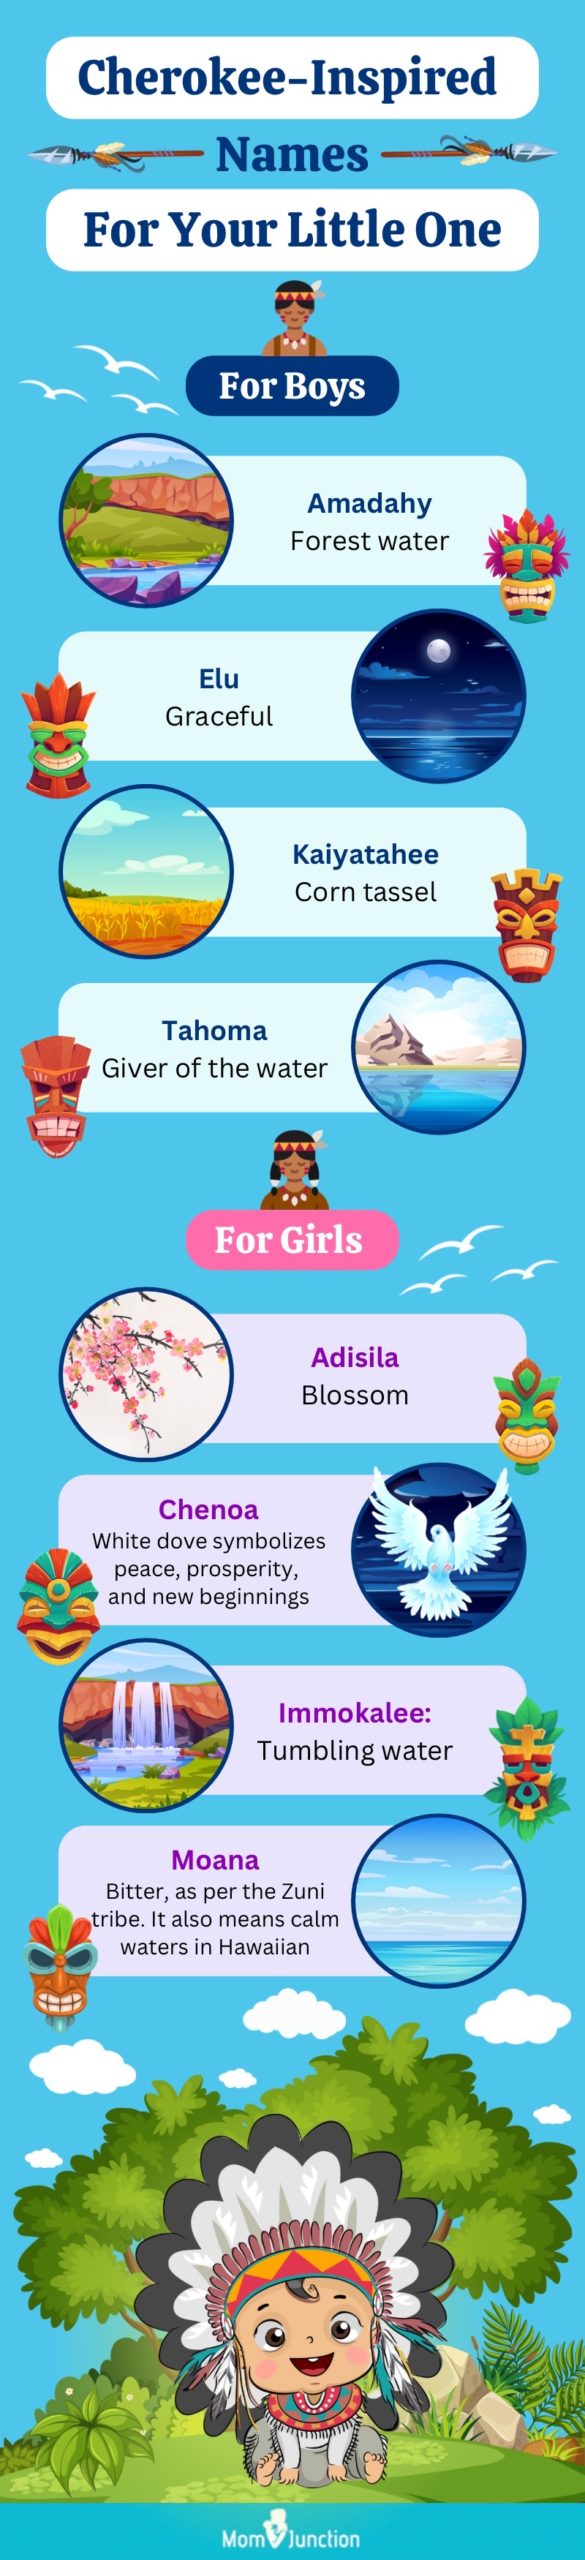 cherokee Names for baby girls and boys (infographic)